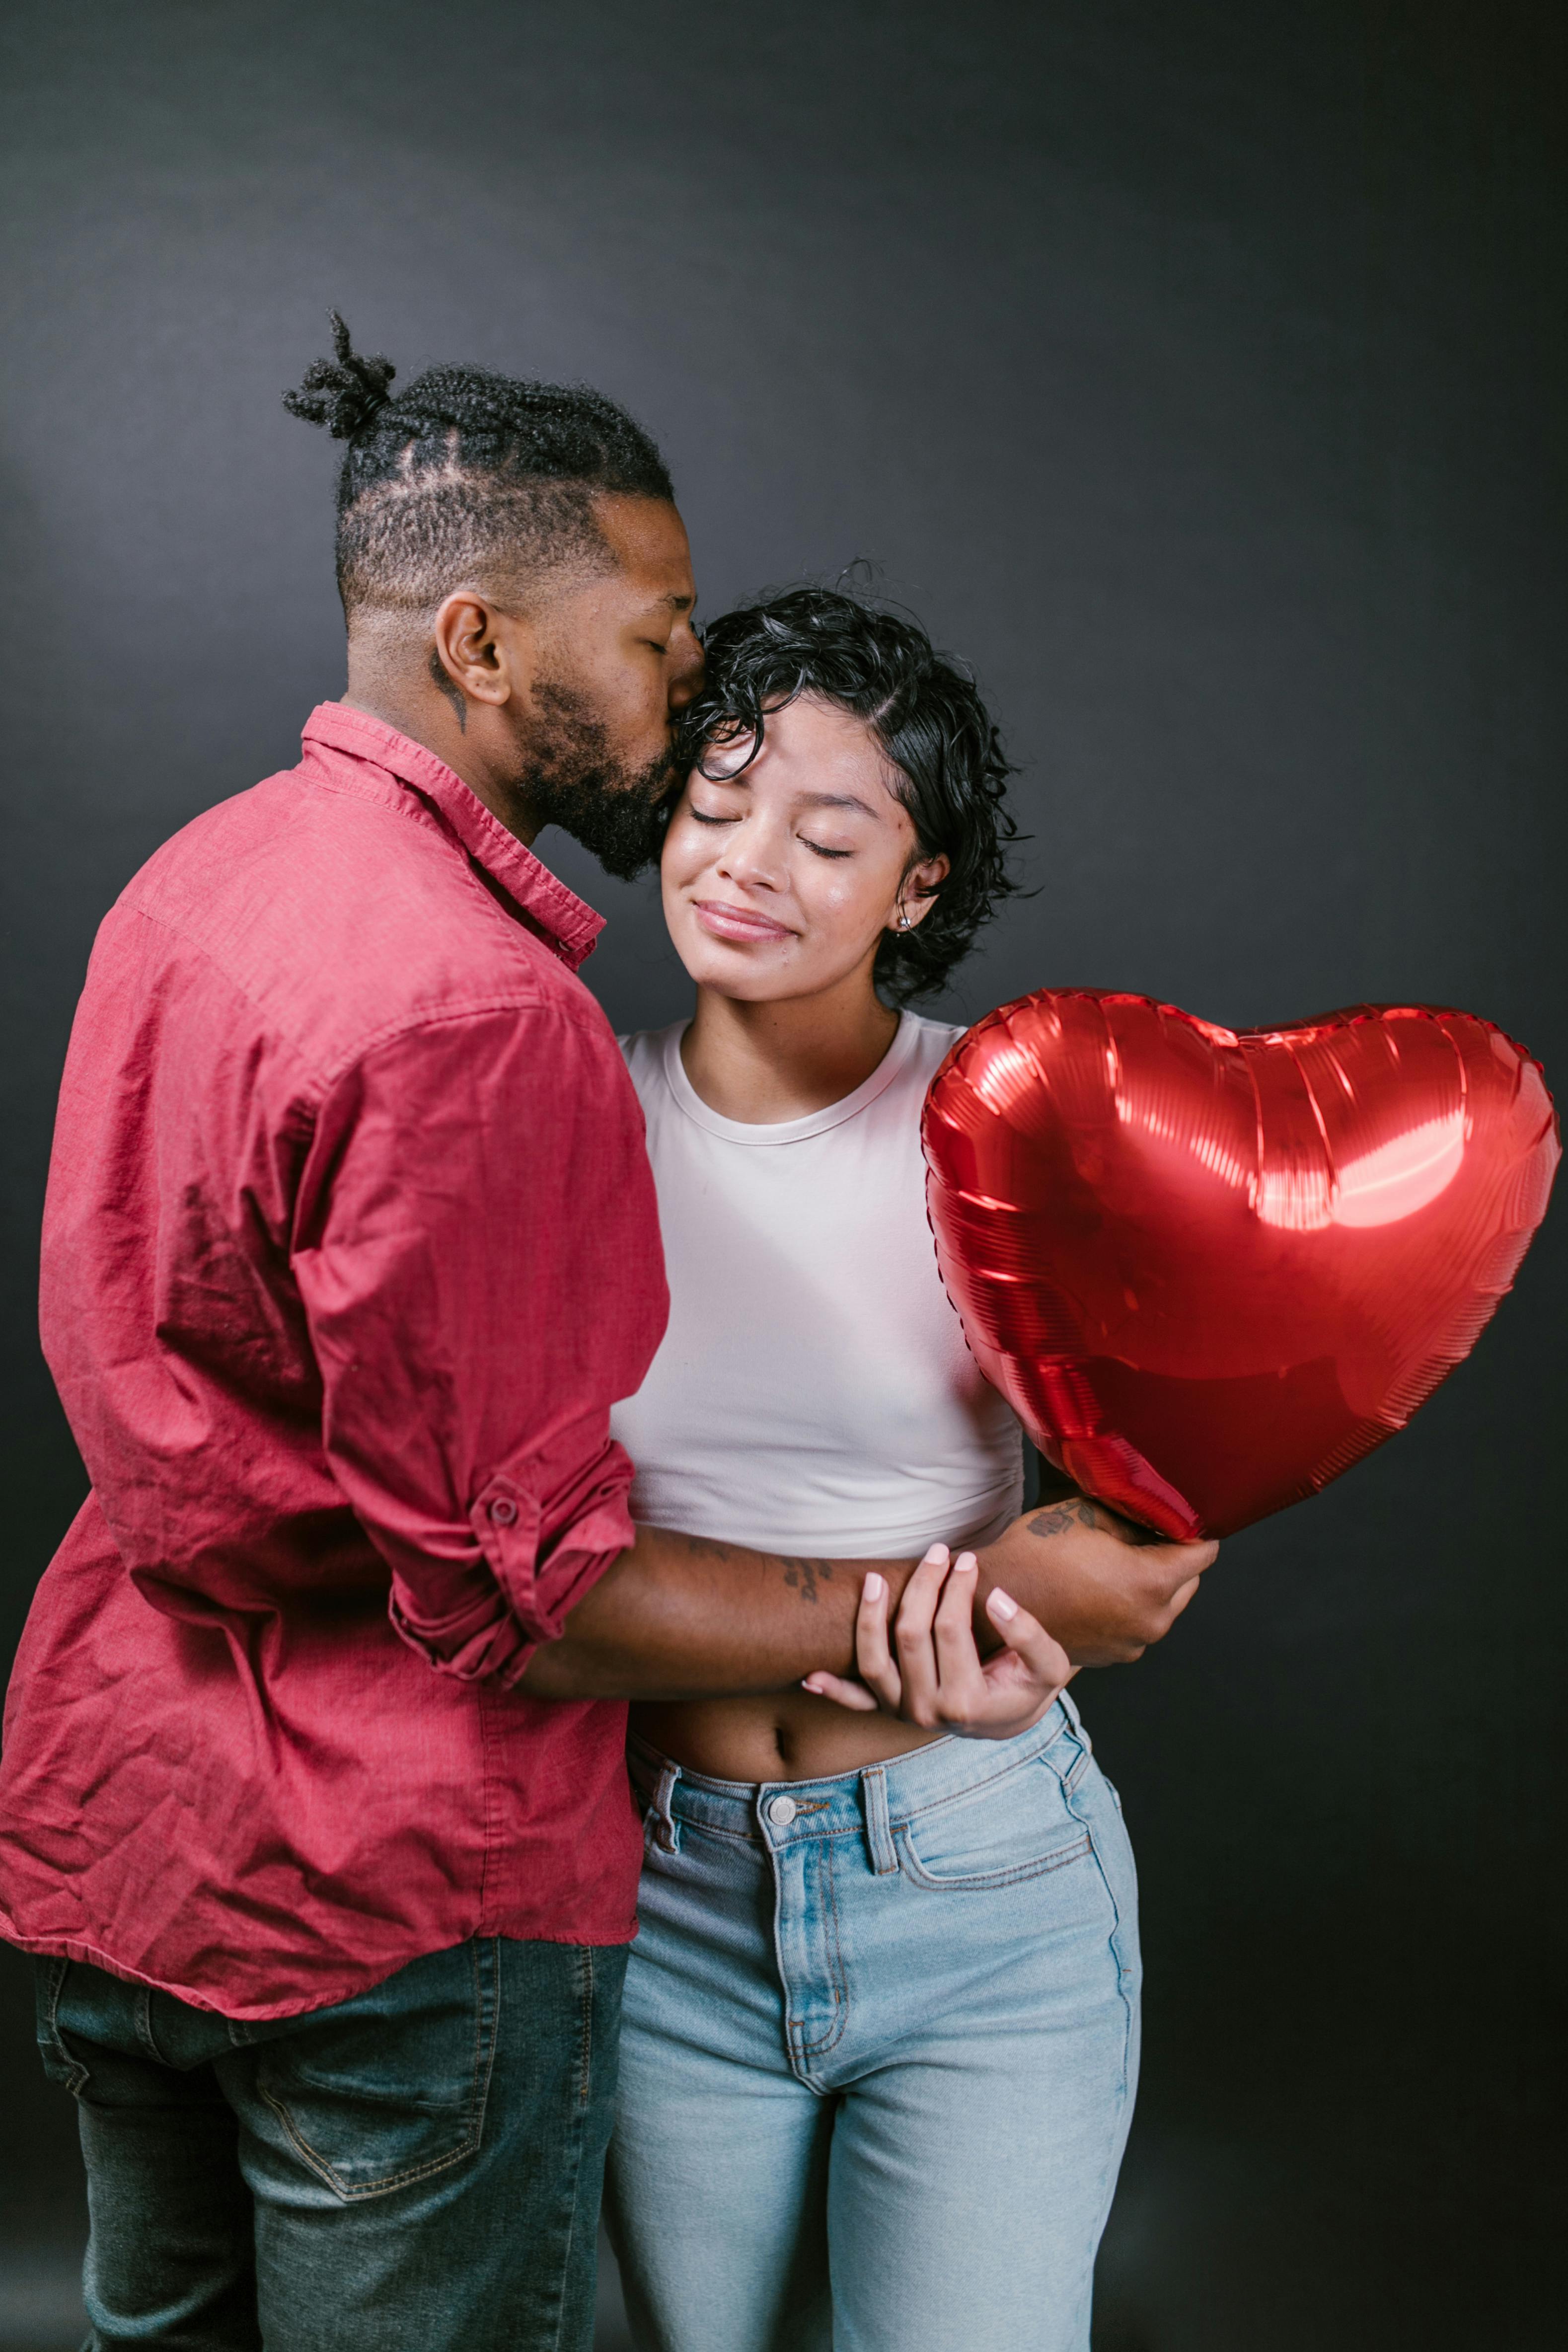 Kissing couple with red balloons - Stock Image - Everypixel